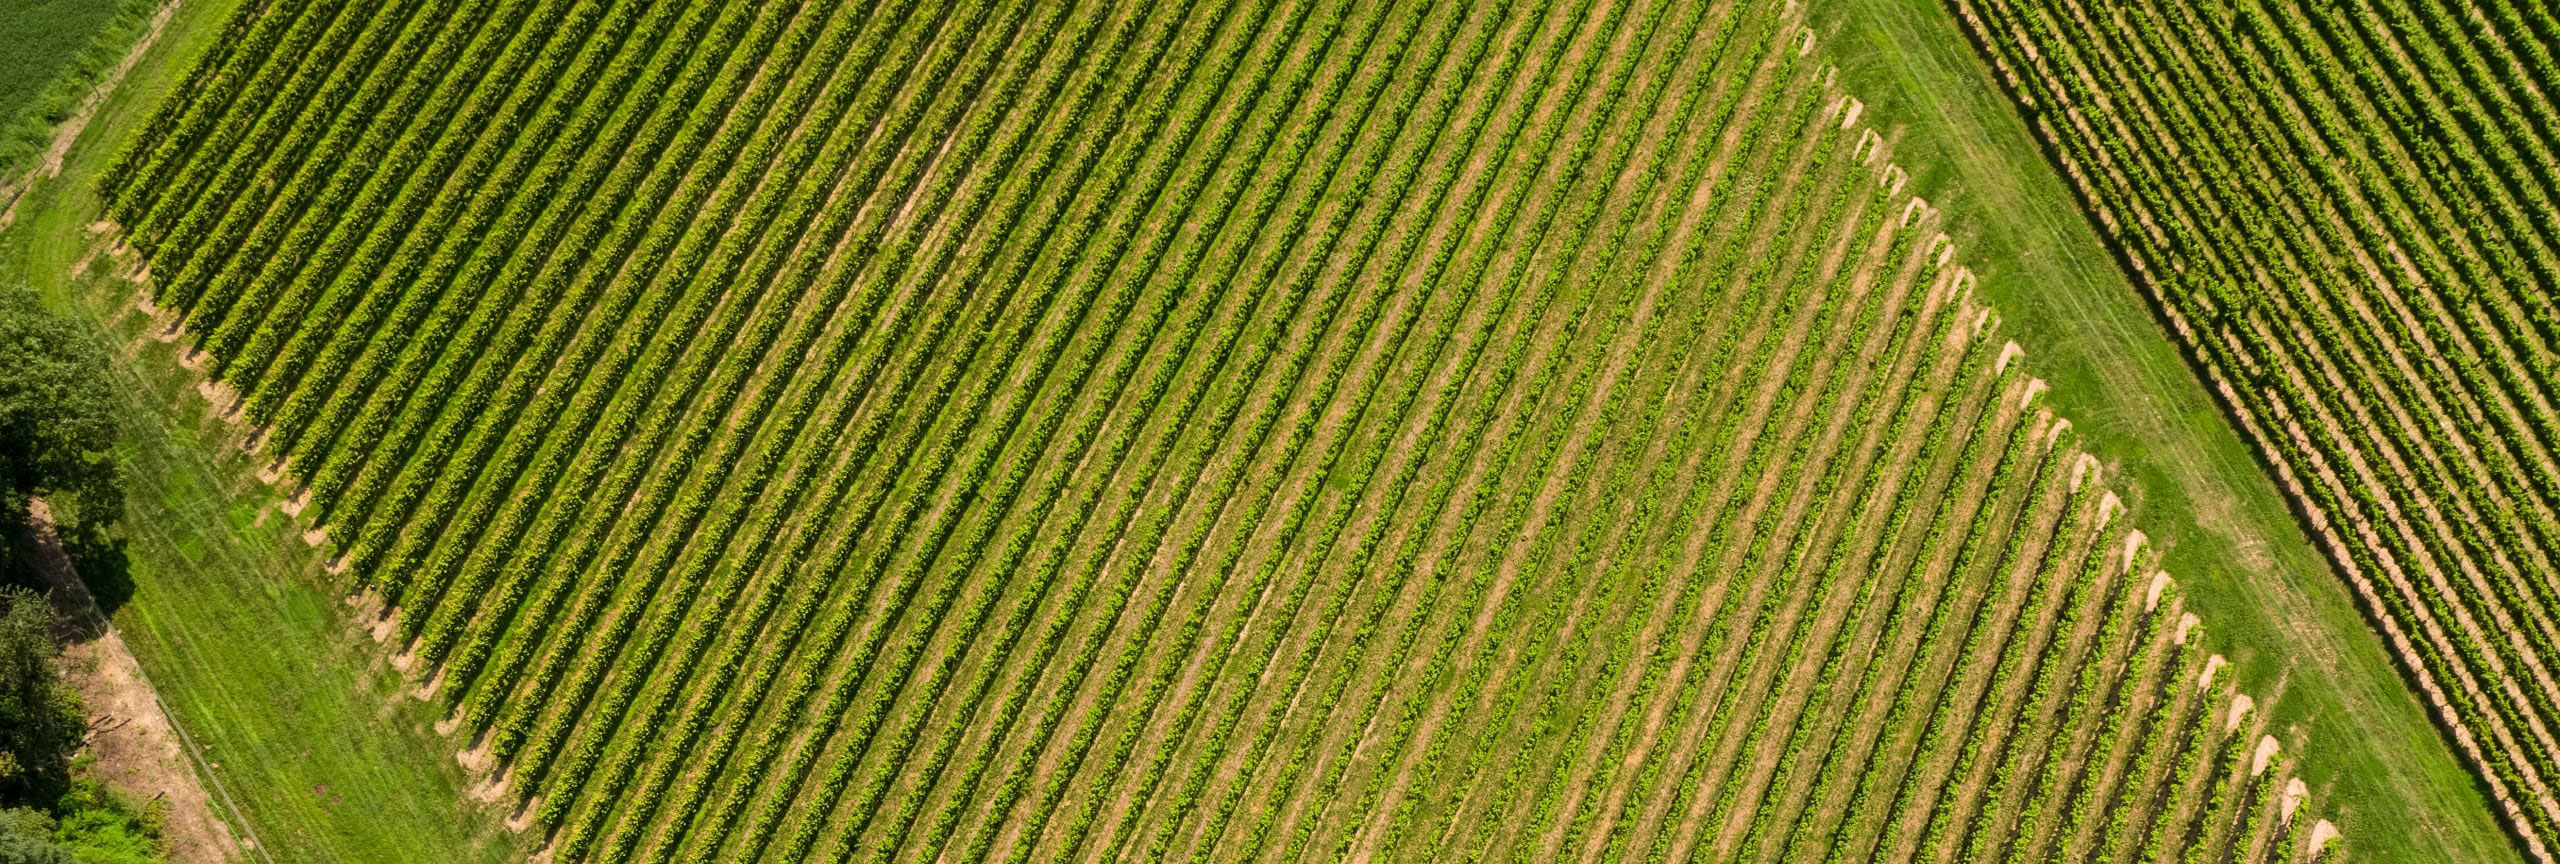 A birds-eye view of vast rows of bright green crops